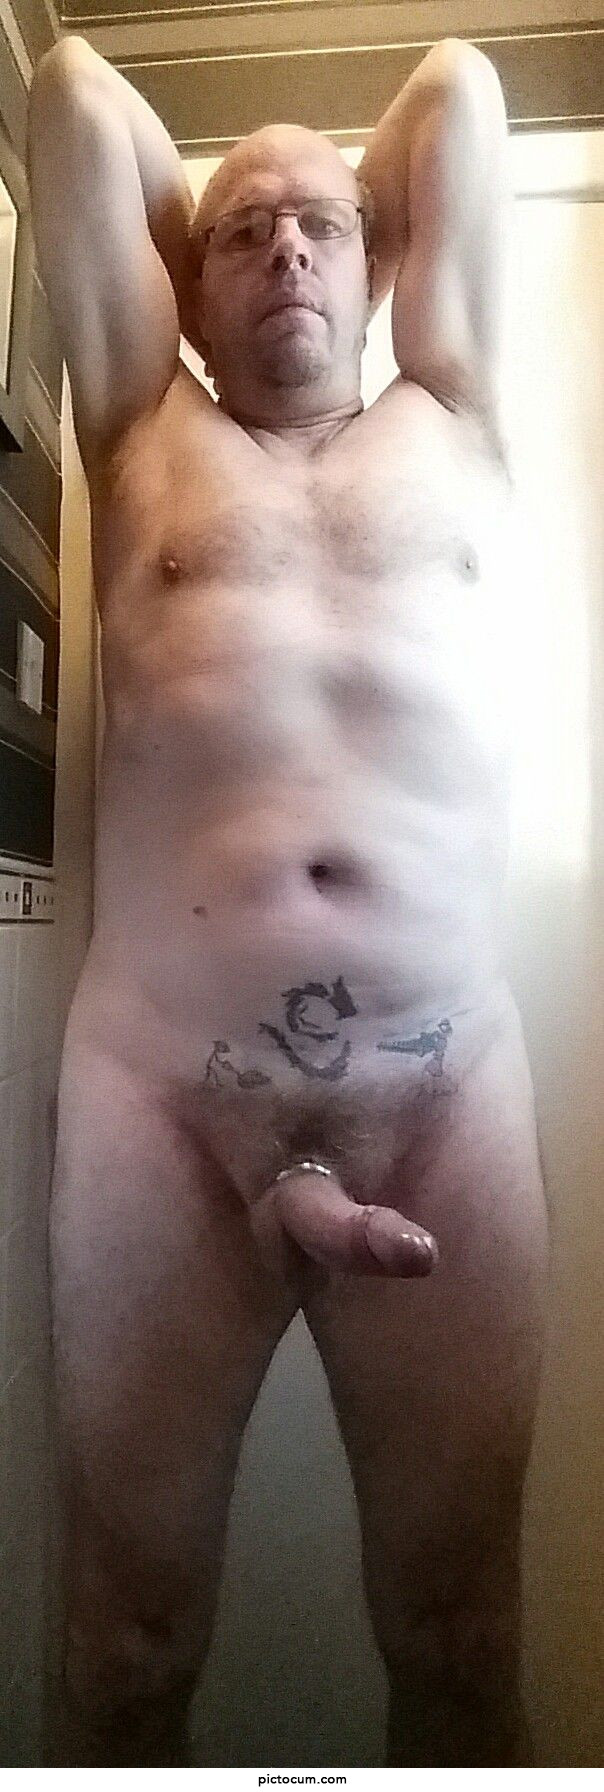 I love posing and showing my thick erect cock.......